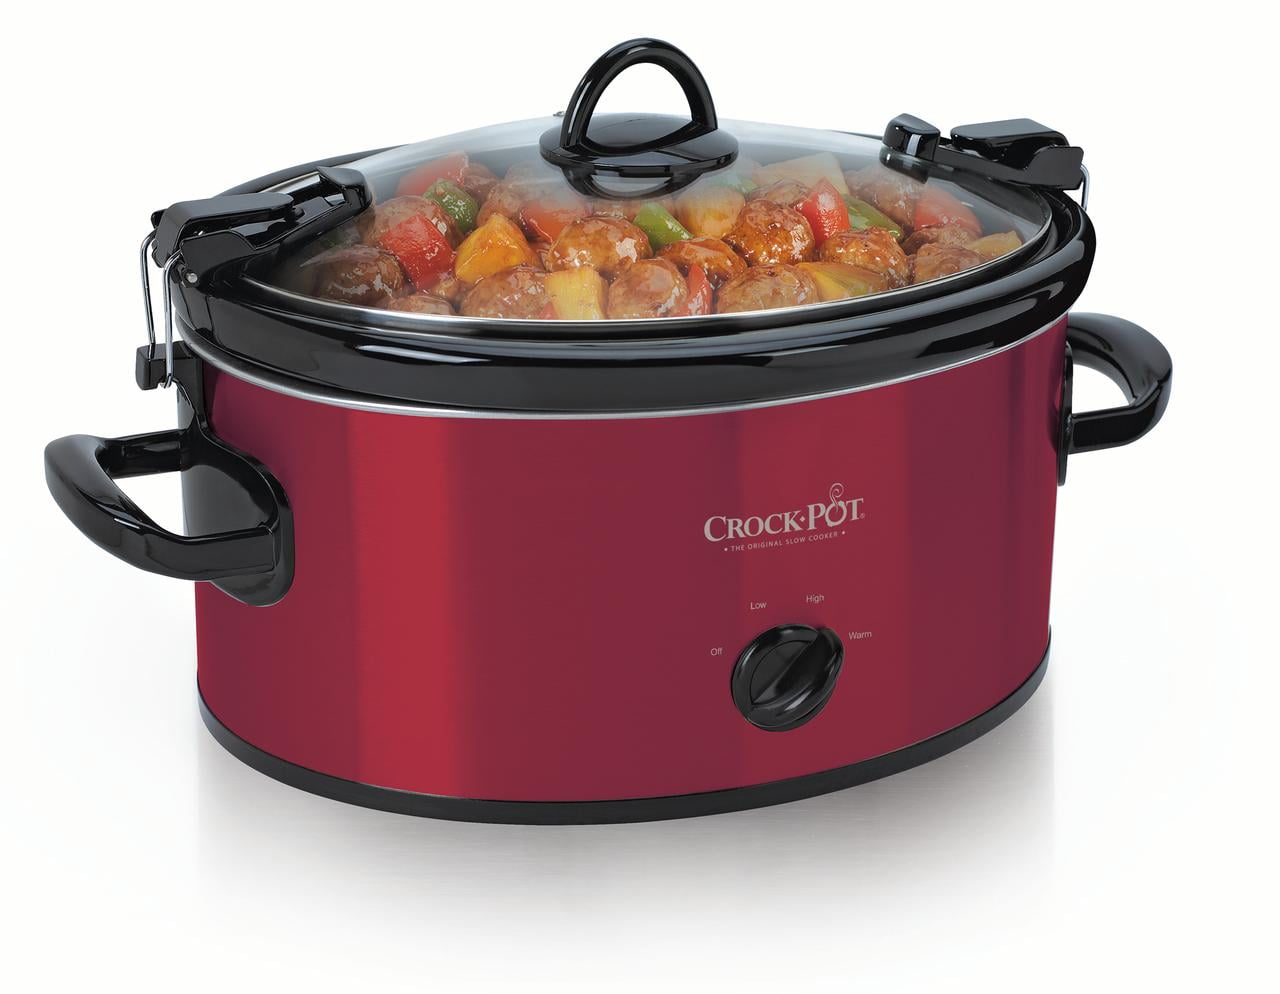 Silver Crock-Pot SCCPVL400-S 4-Quart Cook and Carry Slow Cooker Stainless Steel